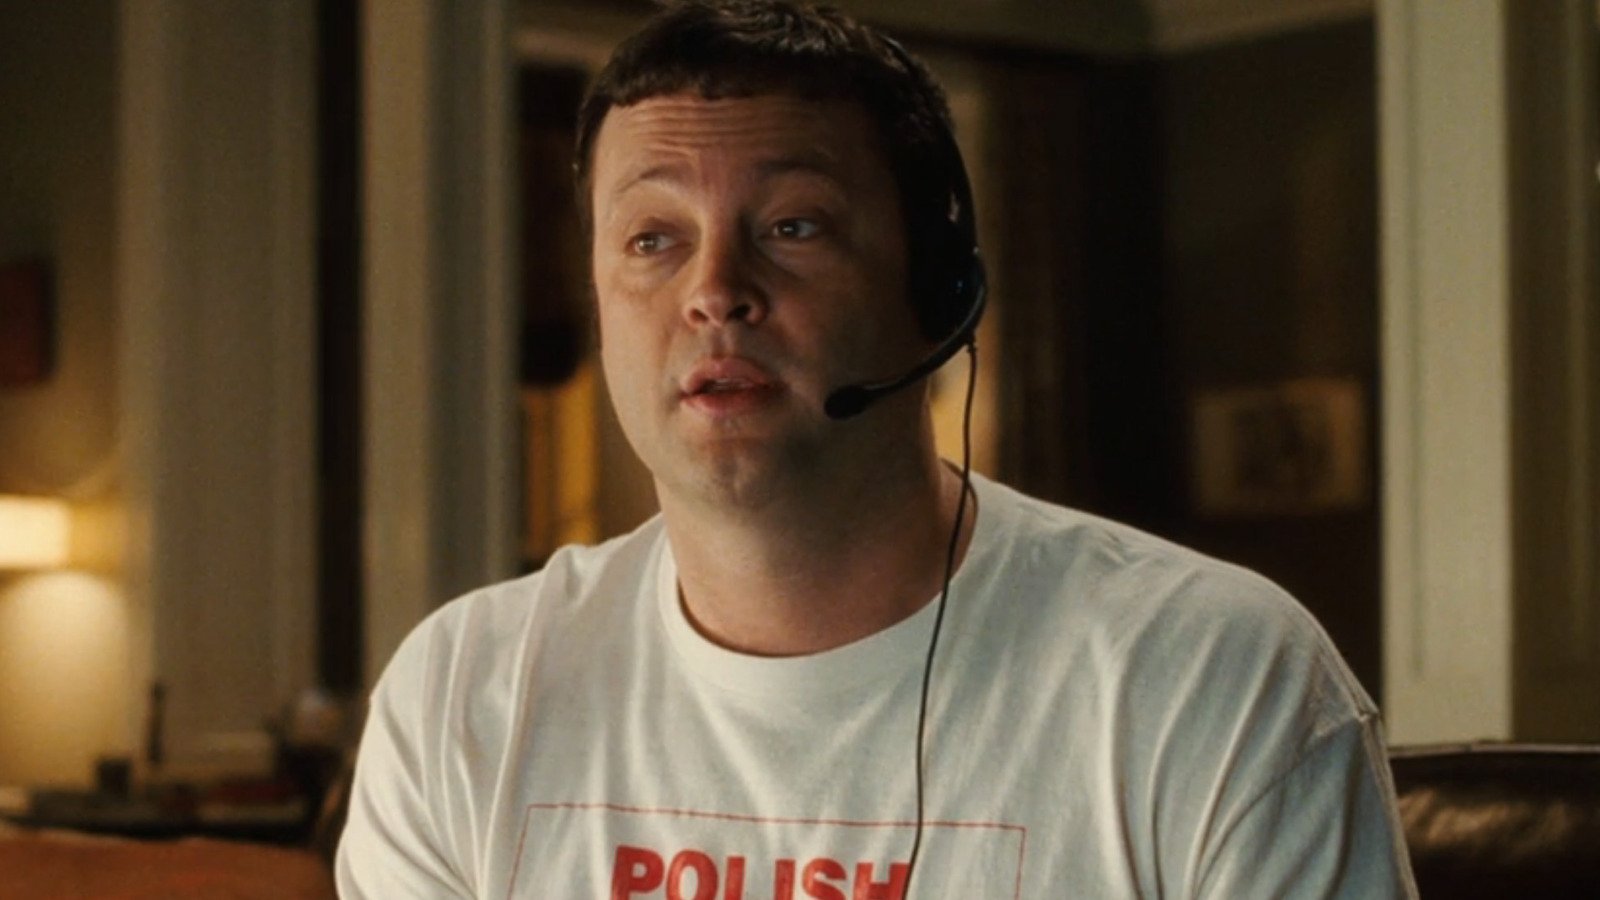 What Movies Did Vince Vaughn Write - And Which Ones Were Hits?